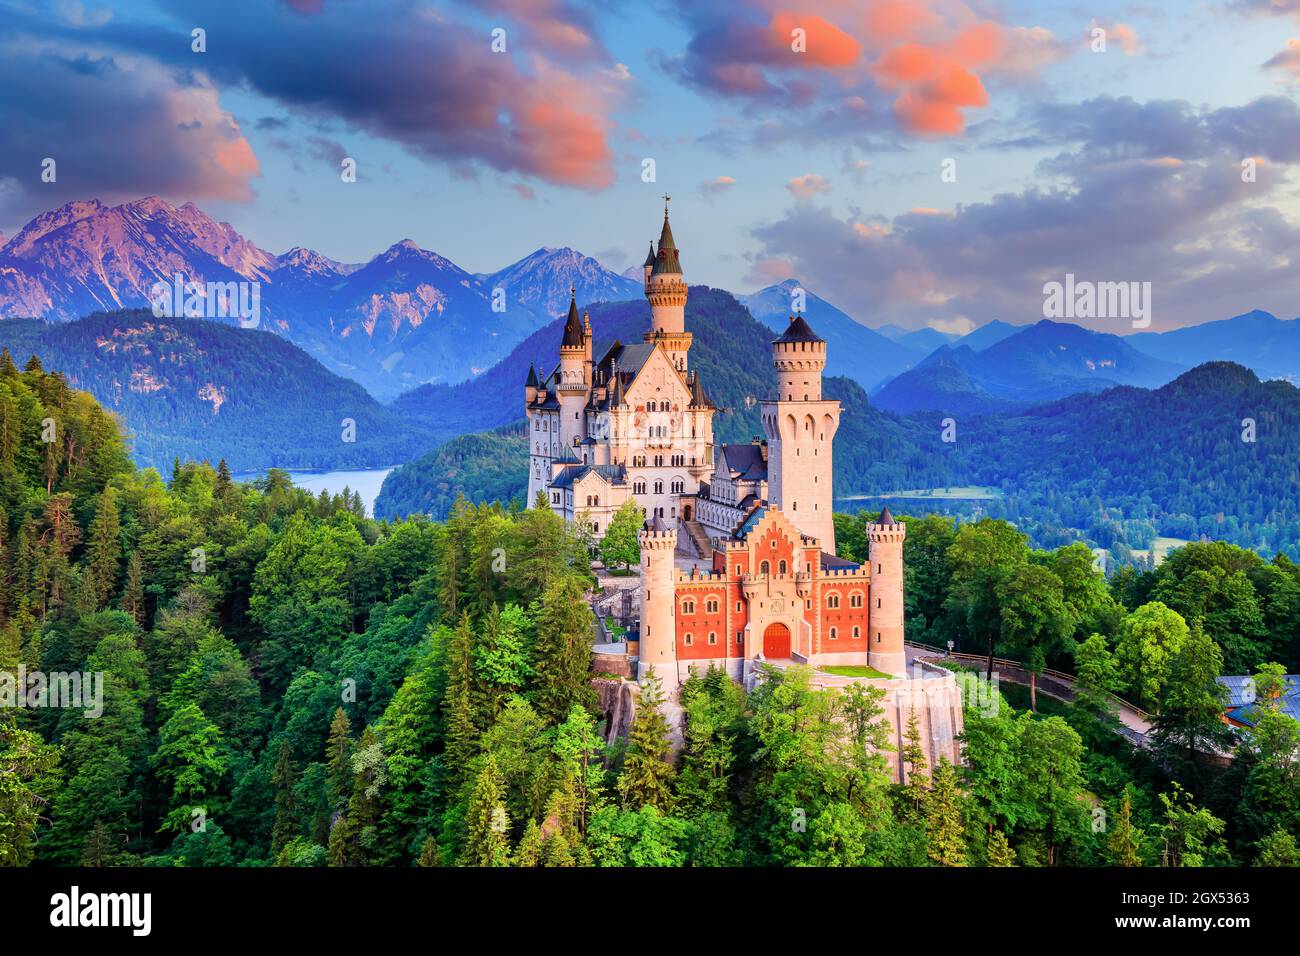 Neuschwanstein Castle, Germany. Front view of the castle and the Bavarian Alps at sunrise. Stock Photo